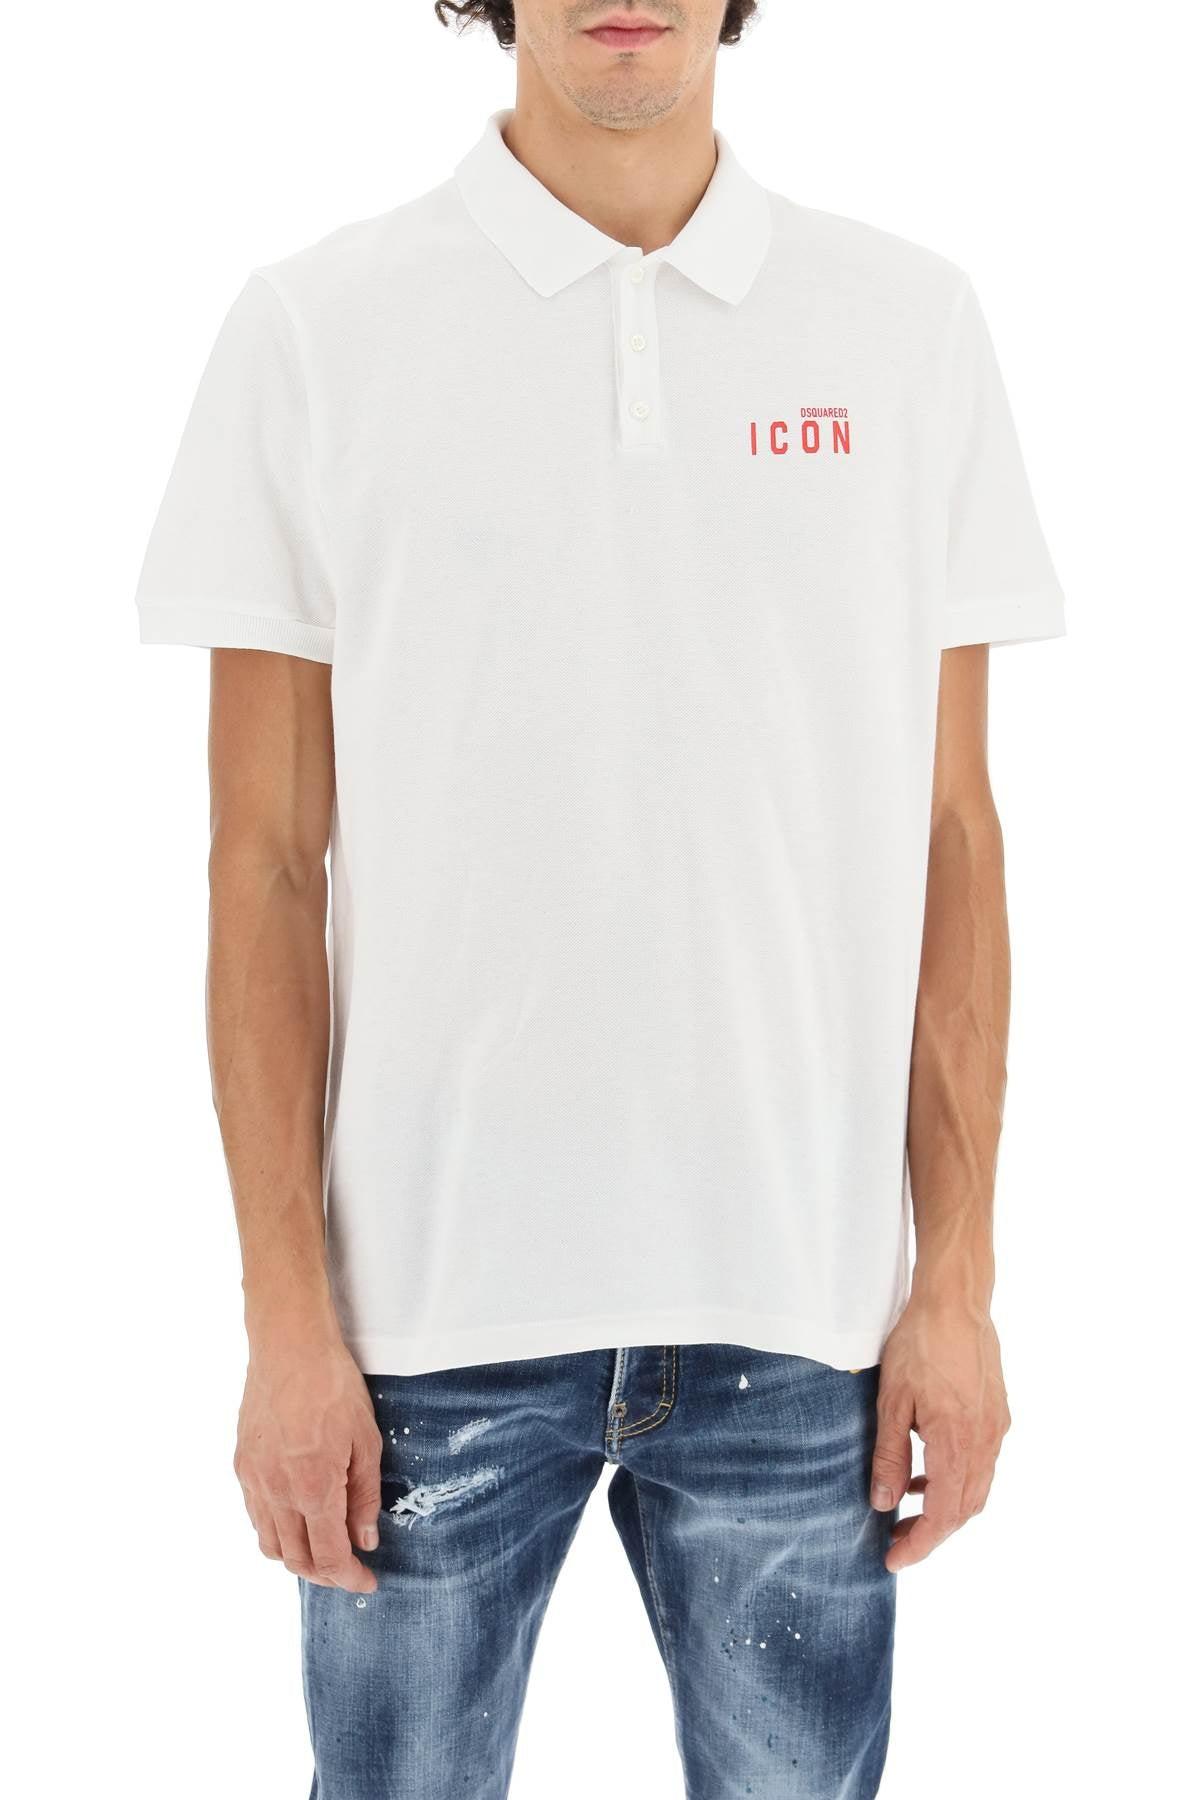 DSquared² Icon Cotton Polo Shirt in White for Men | Lyst